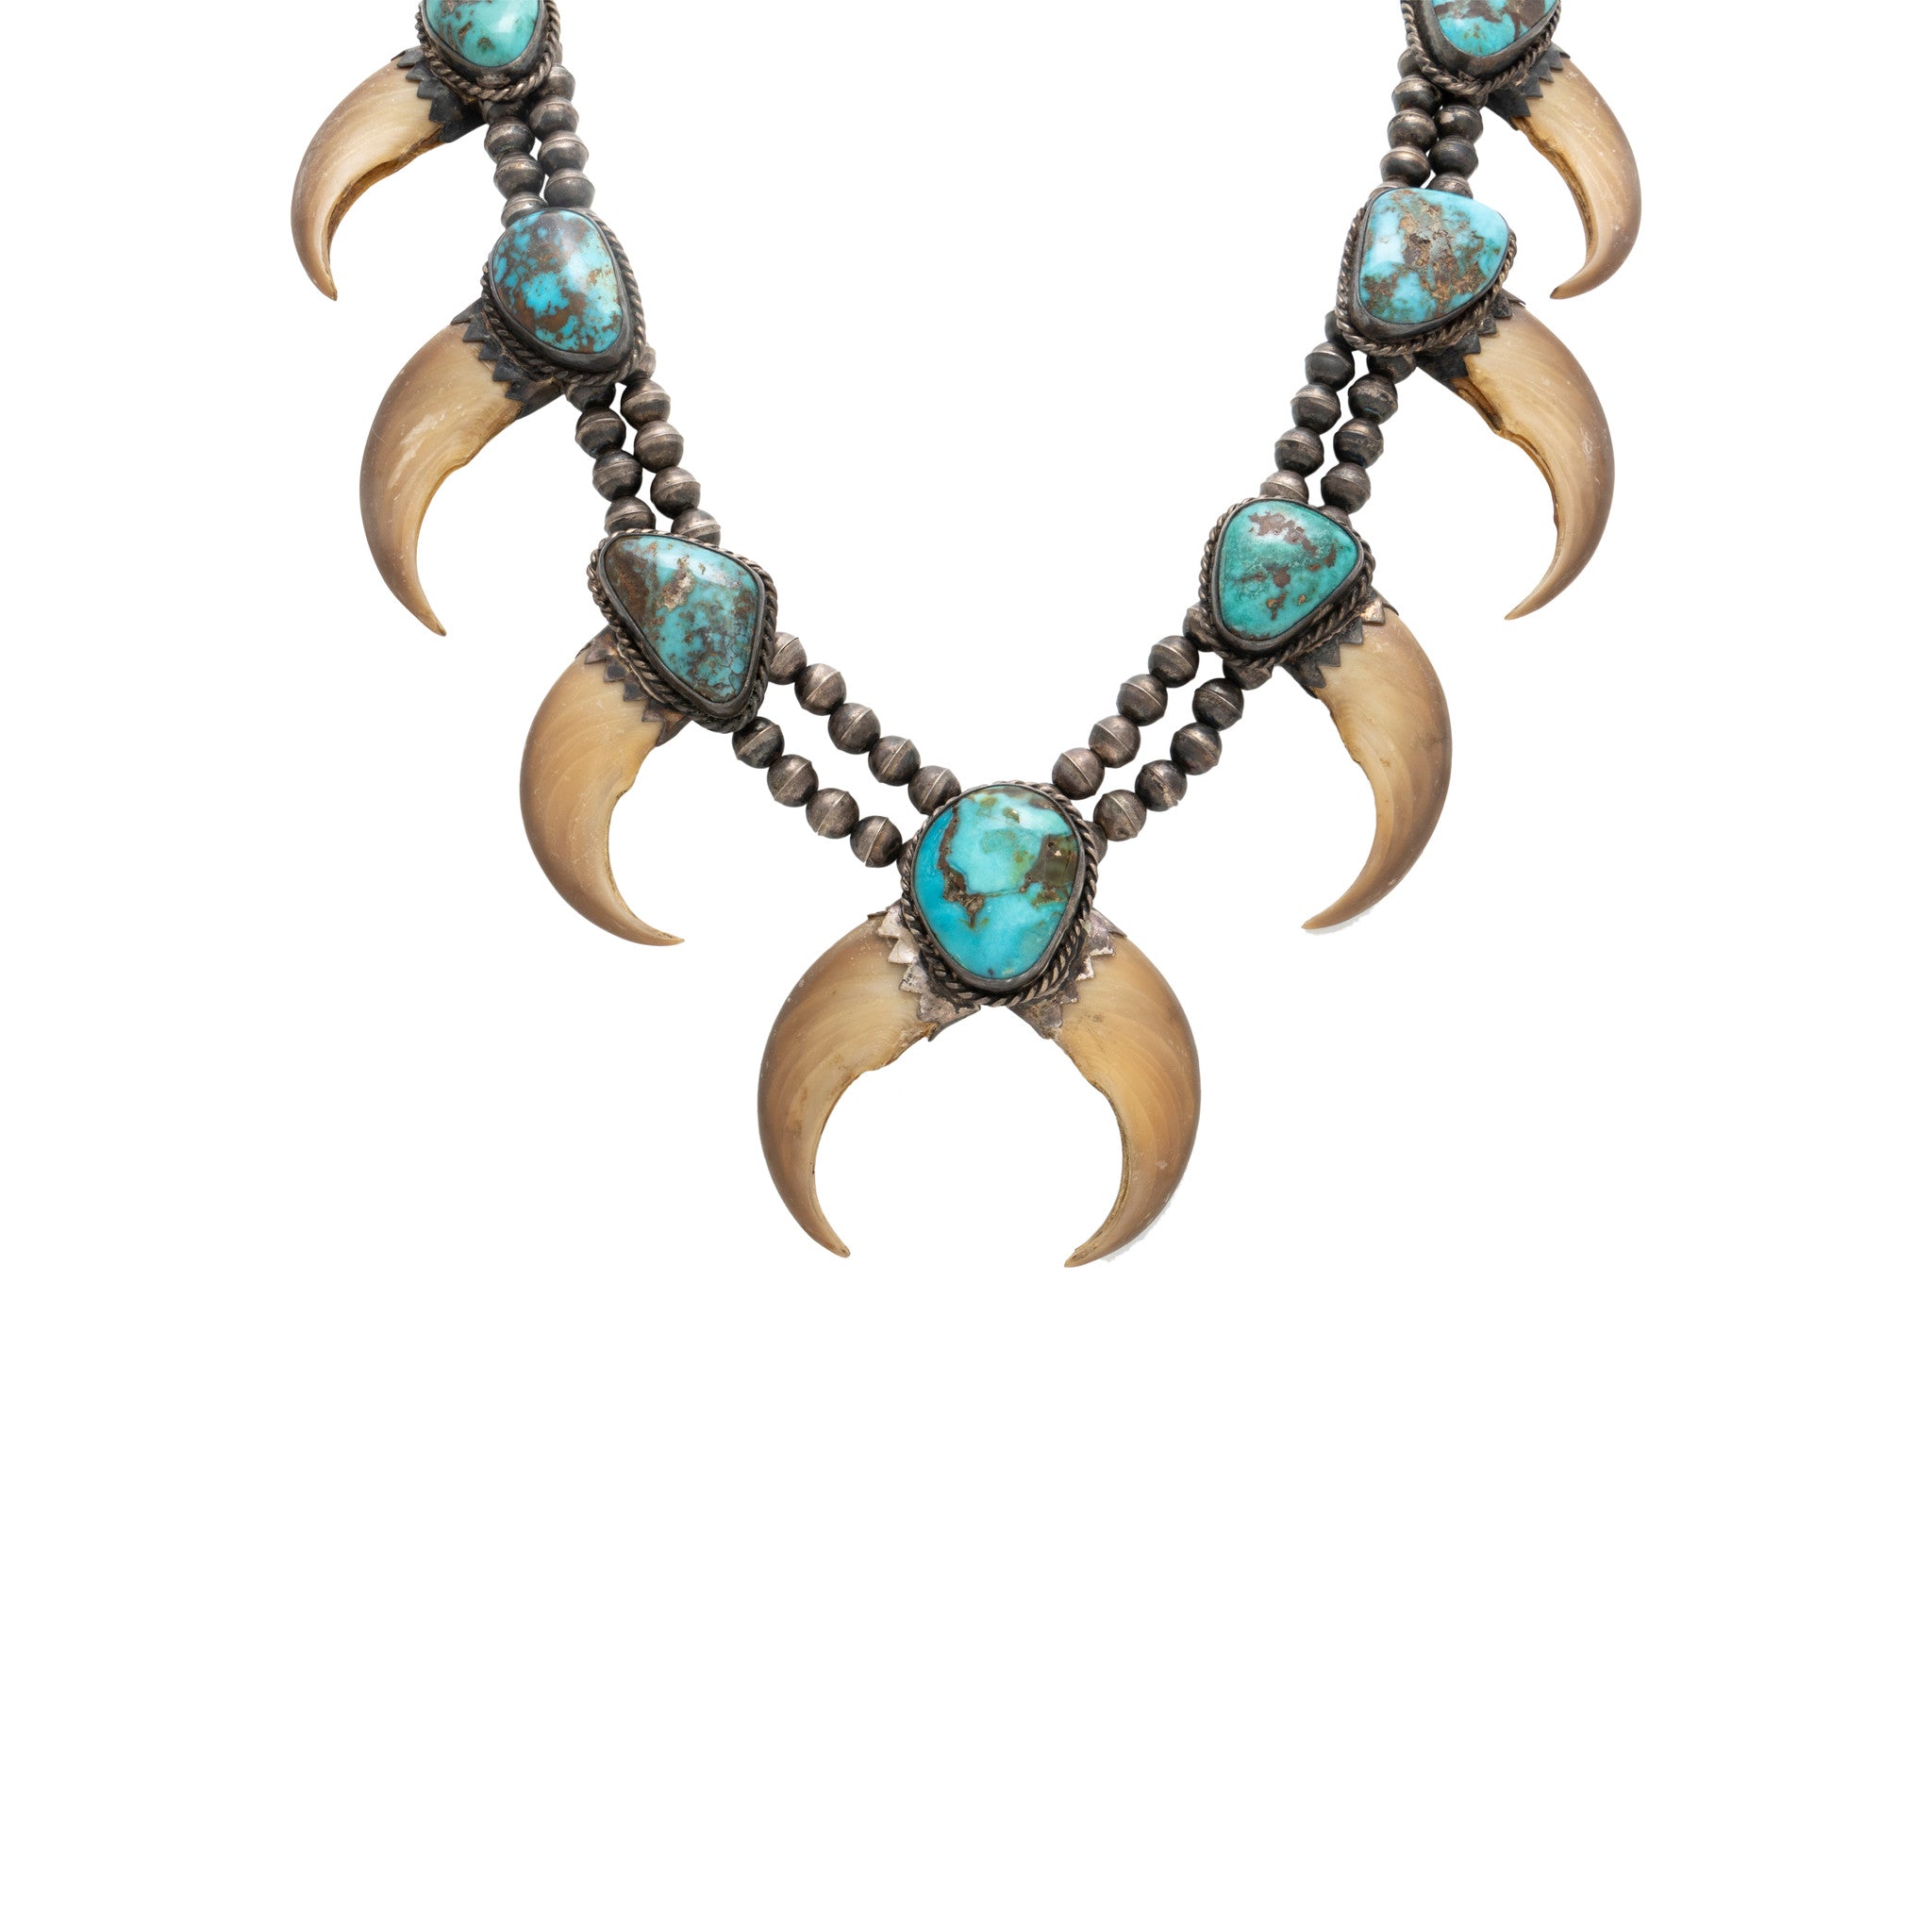 Navajo Turquoise and Bear Claw Squash Blossom, Jewelry, Necklace, Native